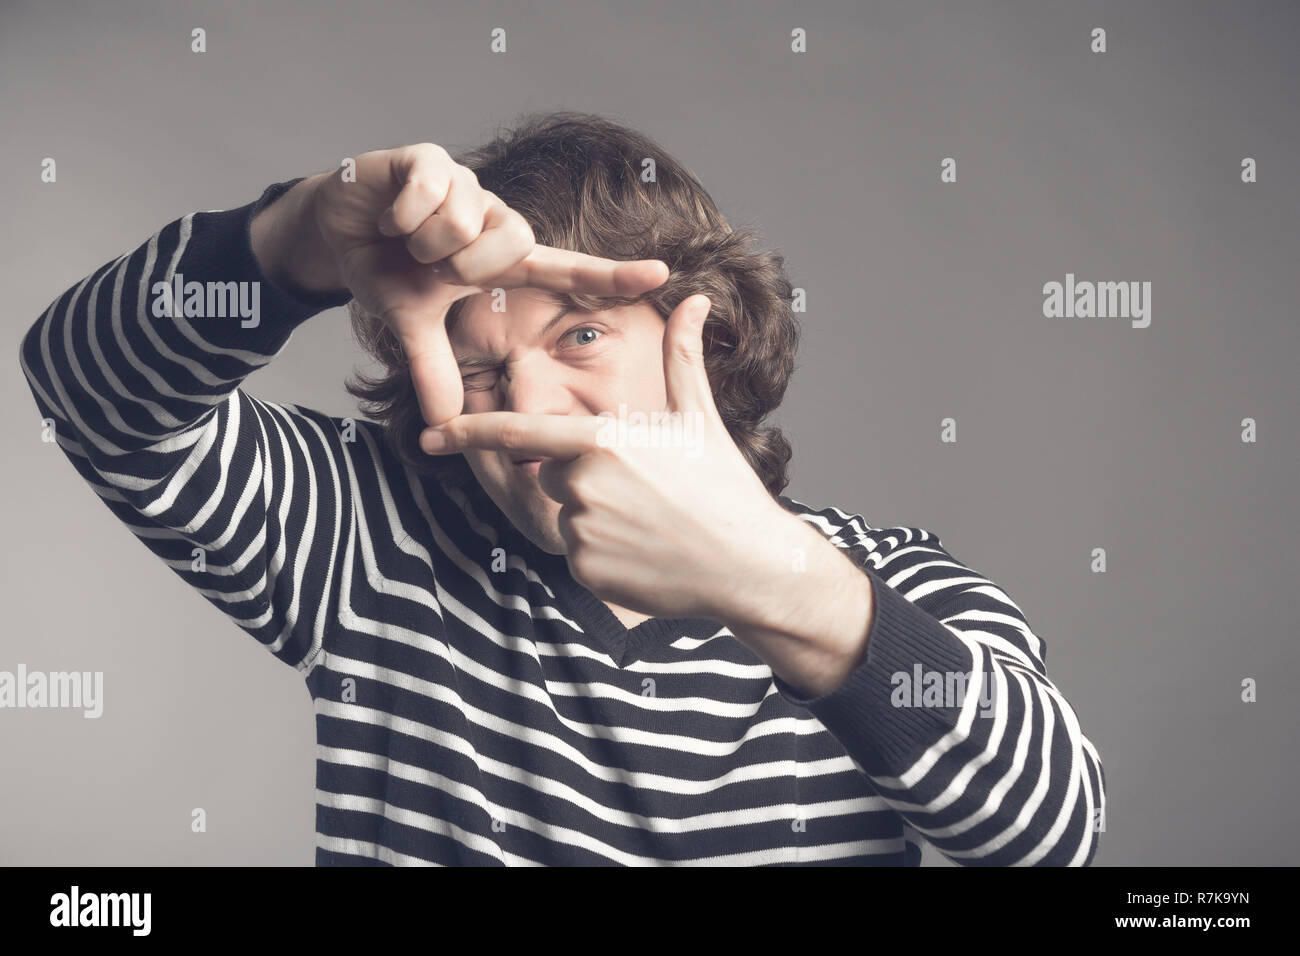 Young handsome man focusing with fingers, framing with hands isolated on grey background. Close up portrait. Stock Photo